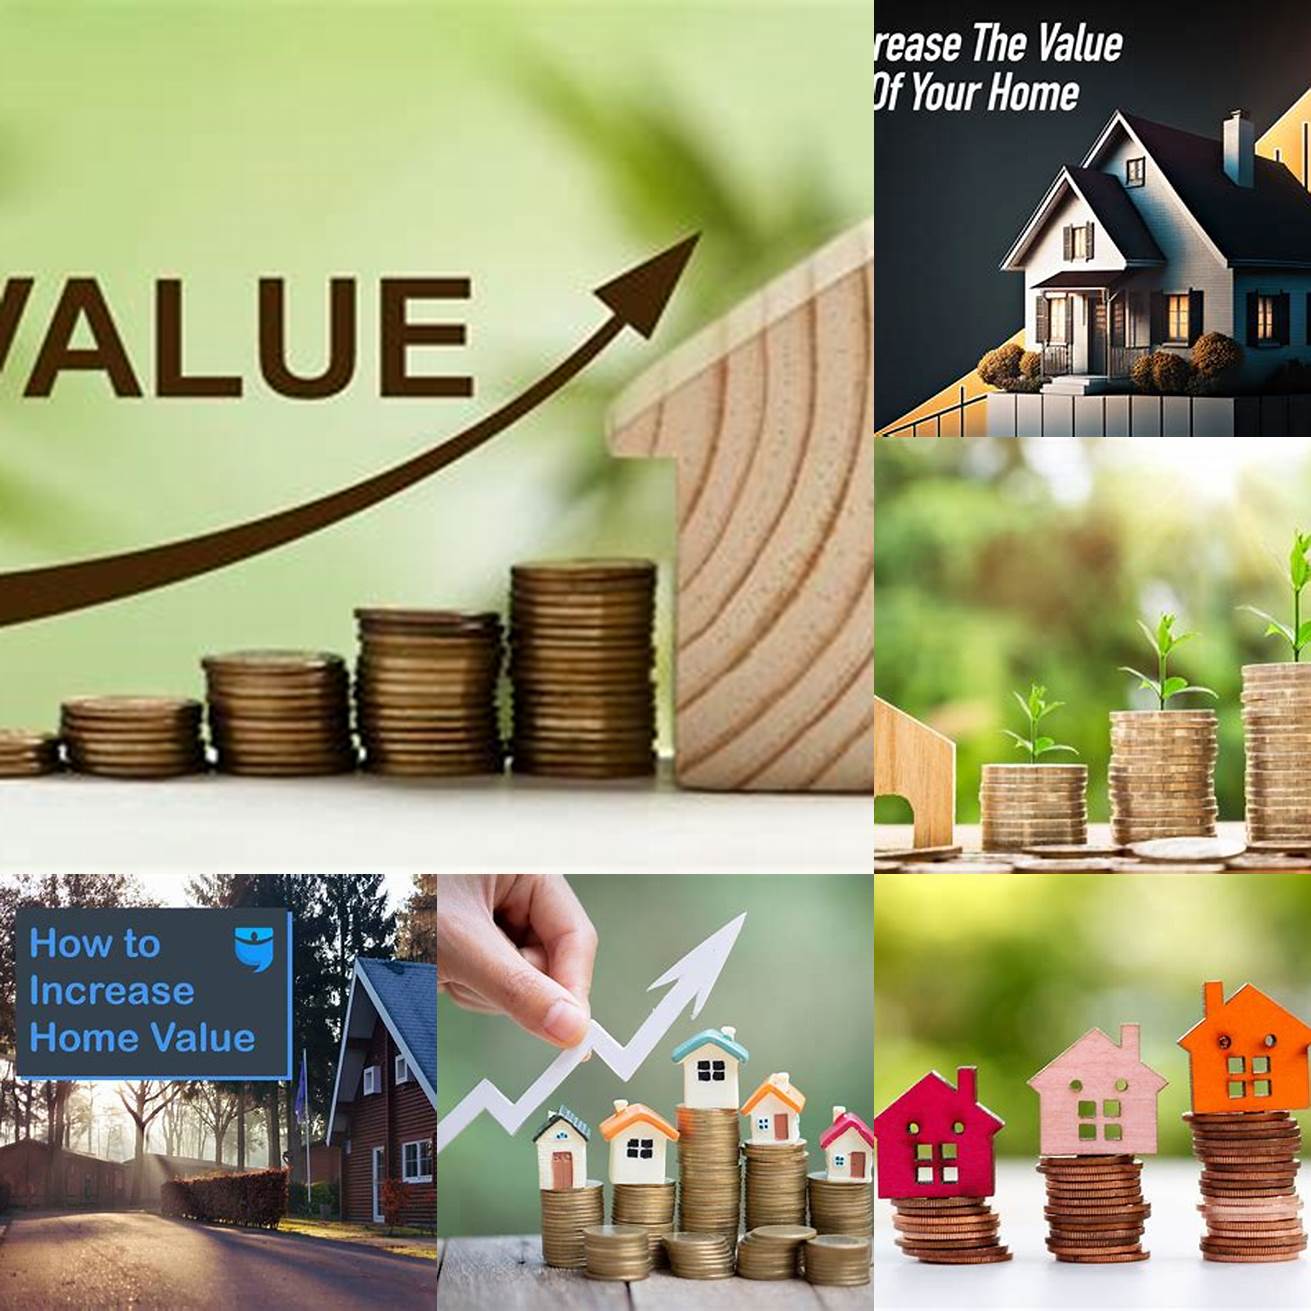 4 Increases the value of your home